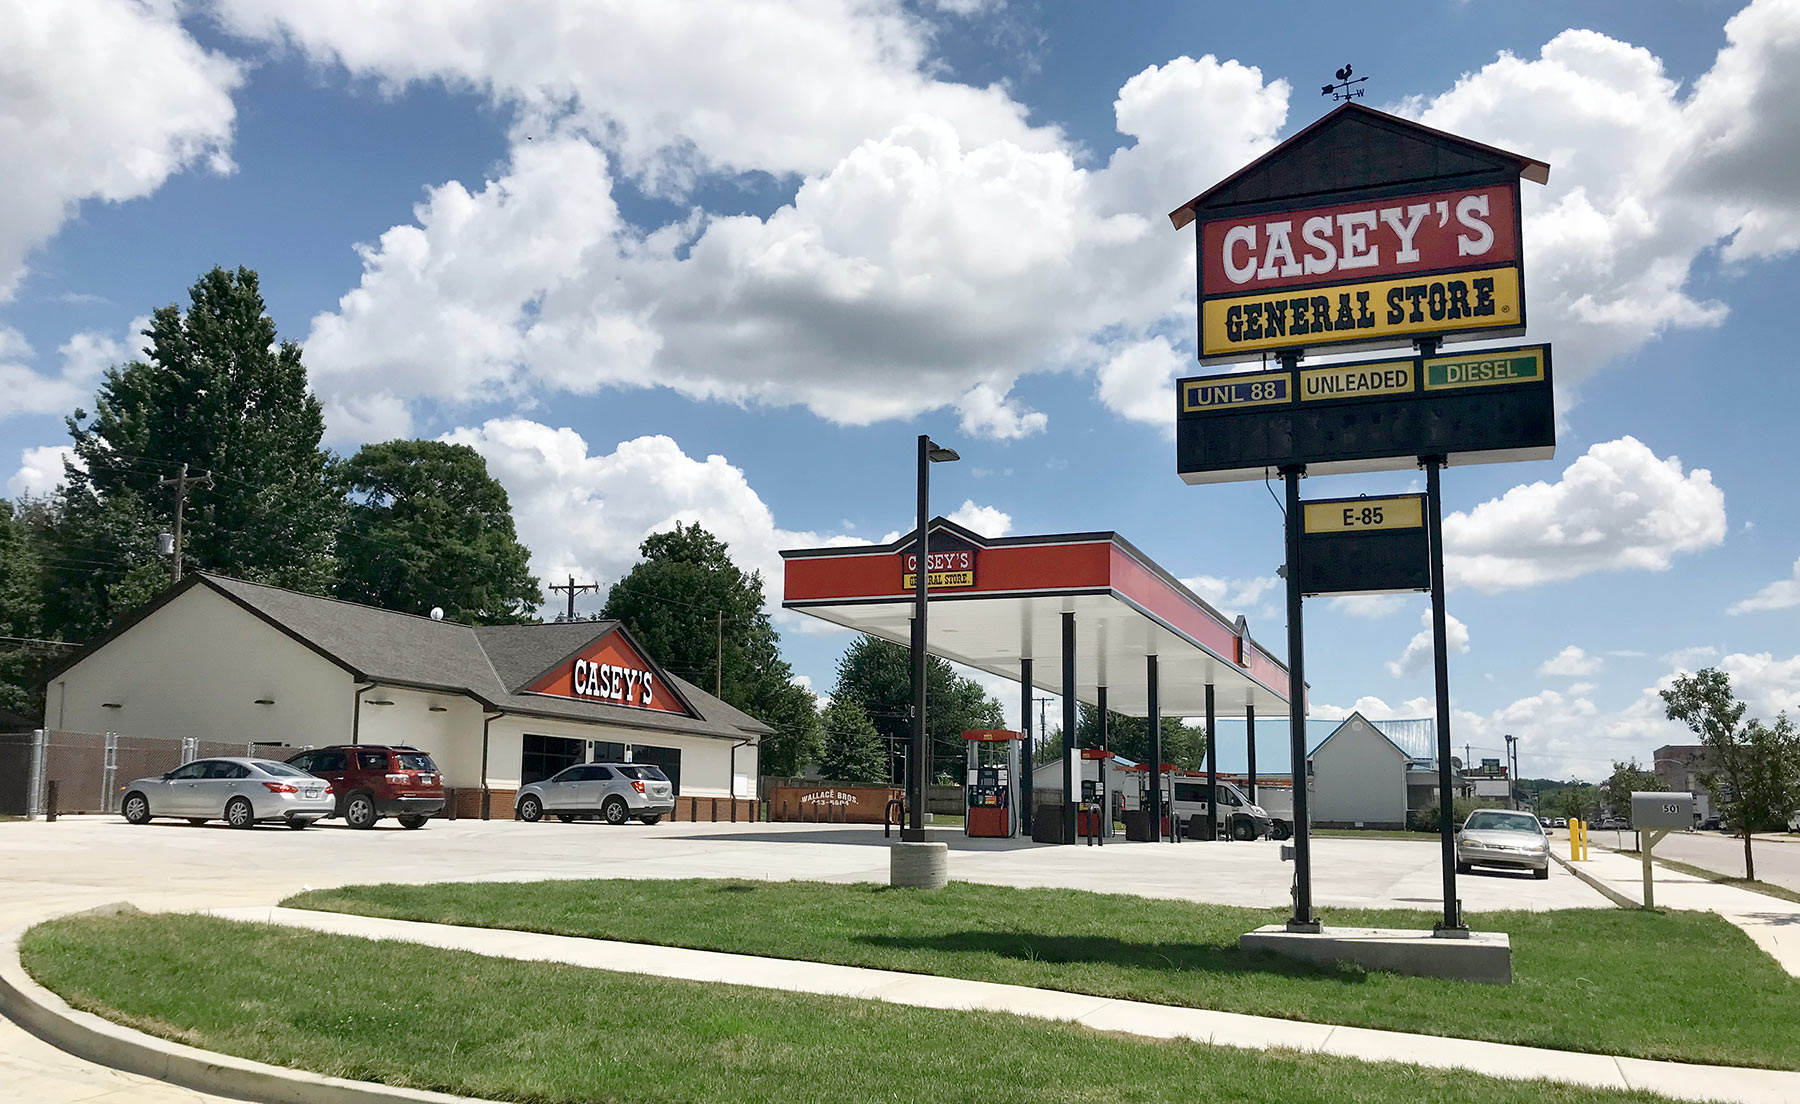 Exterior View of a Casey's General Store